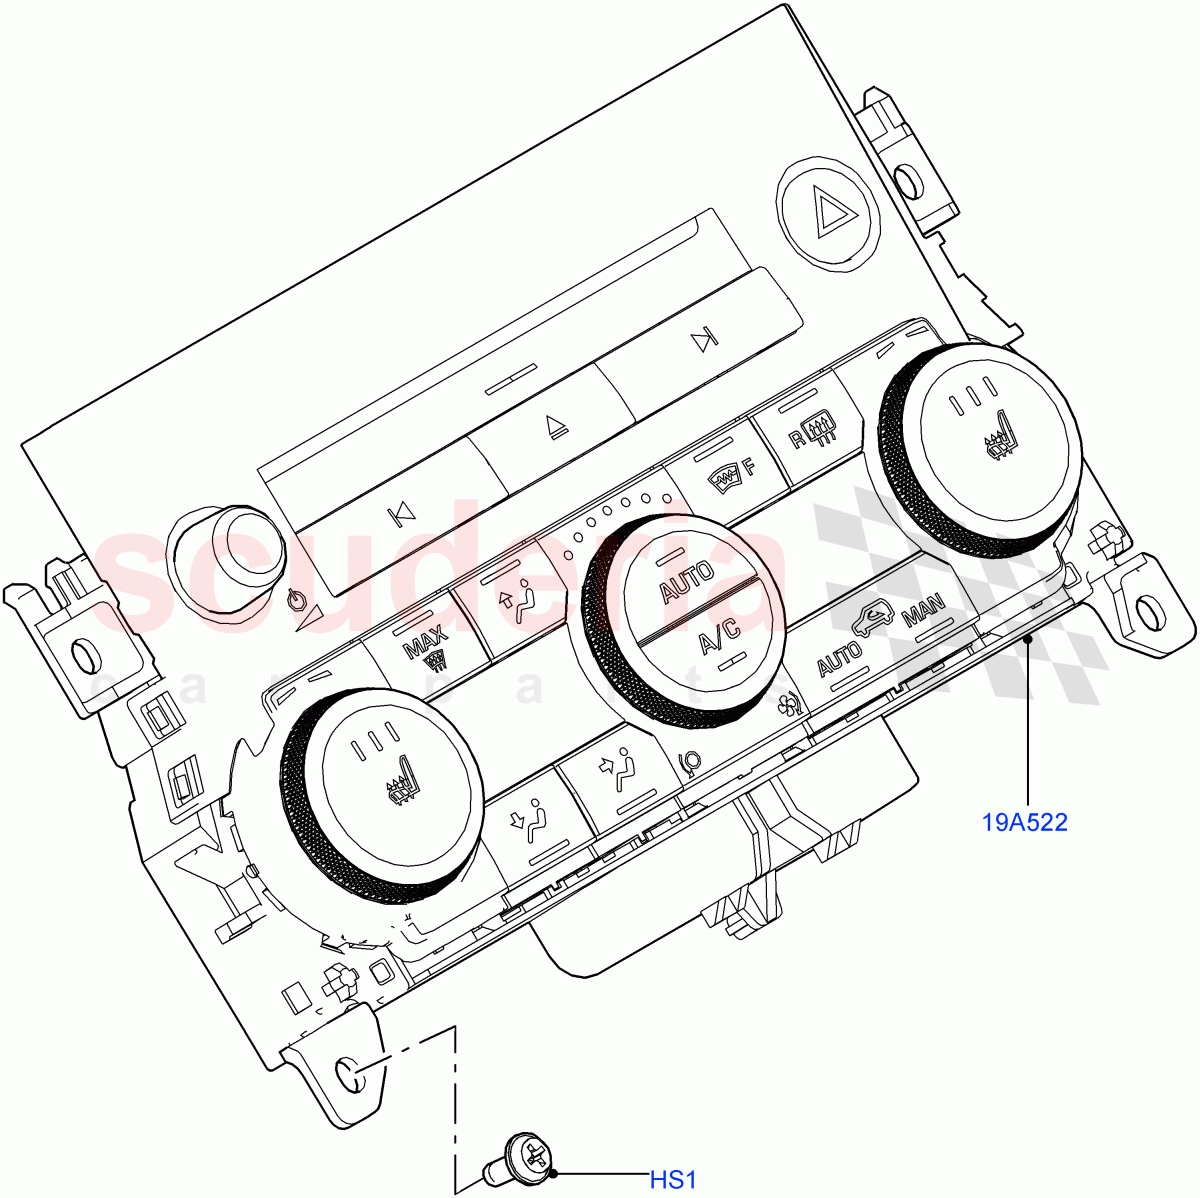 Heater & Air Conditioning Controls(Changsu (China))((V)FROMEG000001) of Land Rover Land Rover Range Rover Evoque (2012-2018) [2.0 Turbo Petrol GTDI]